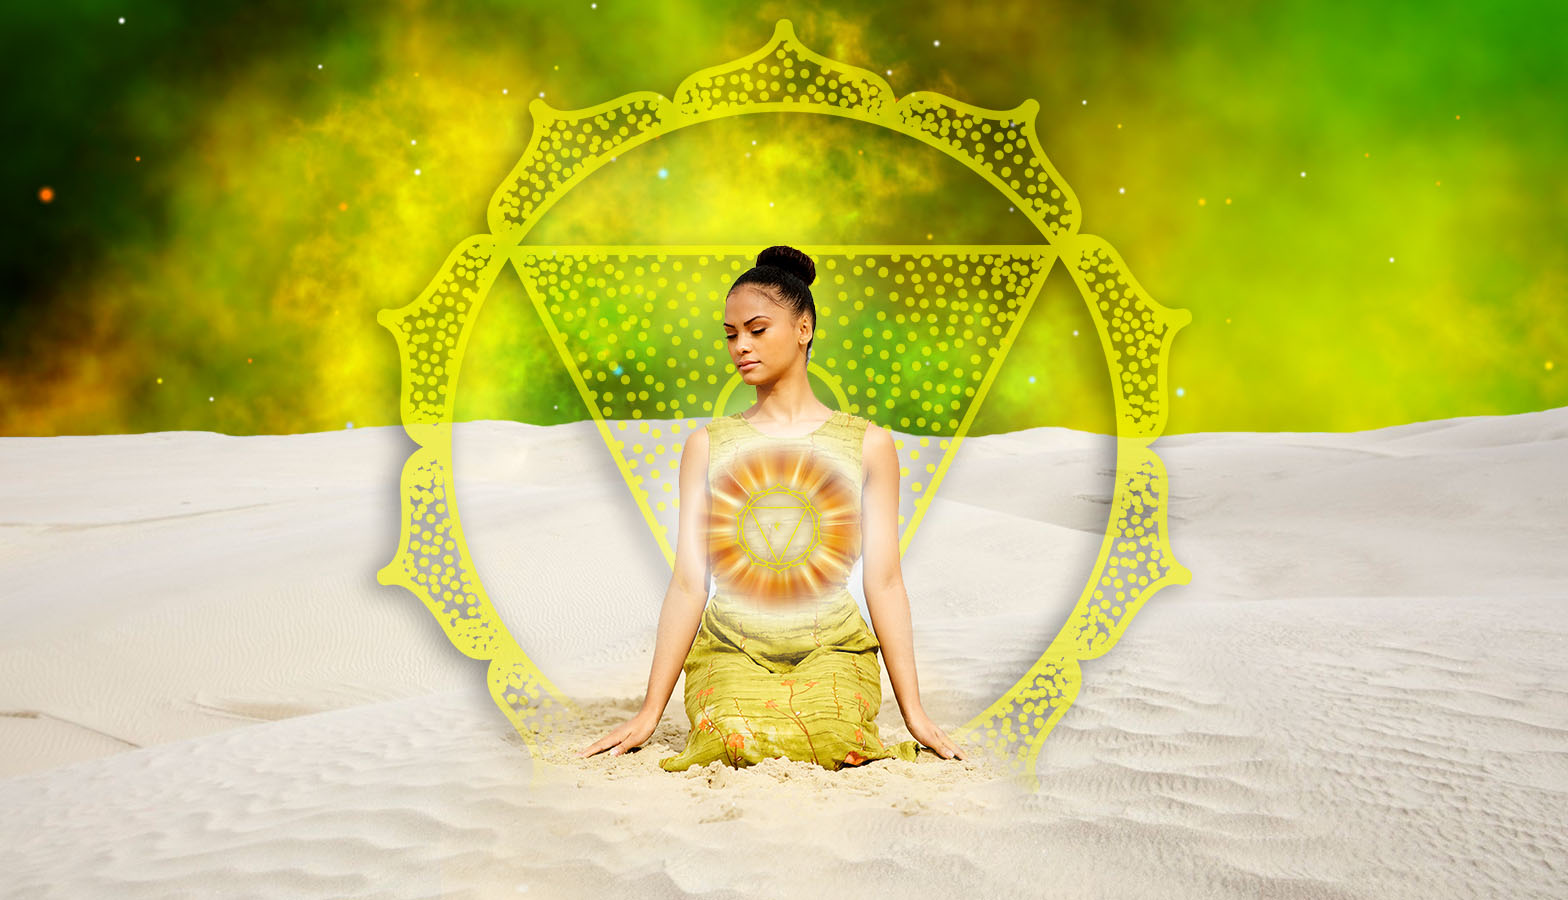 Facts About Solar Plexus Chakra (Manipura): Meanings, Properties, and Benefits